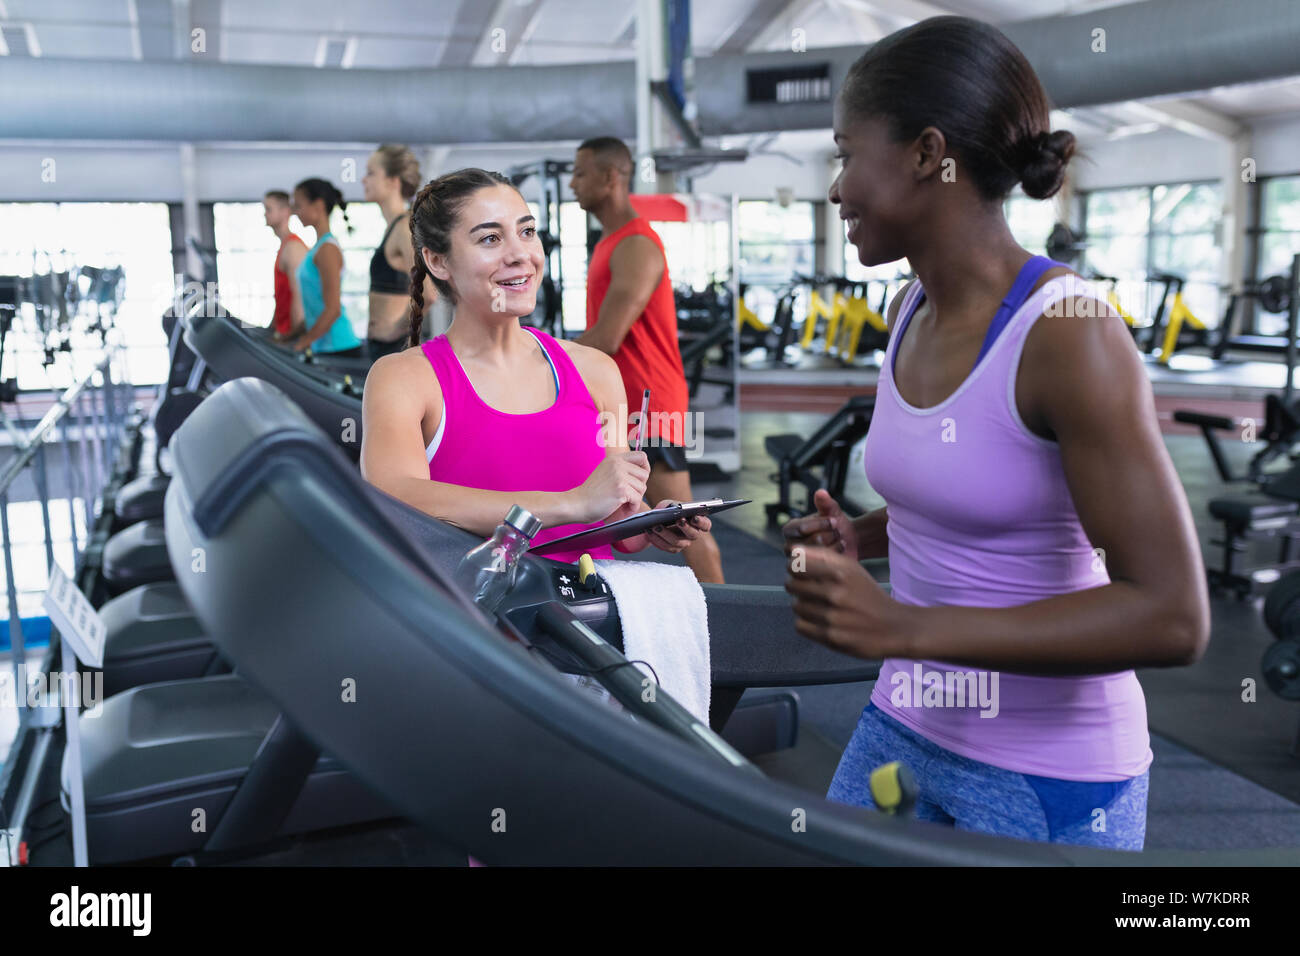 Female trainer interacting with woman in fitness center Stock Photo